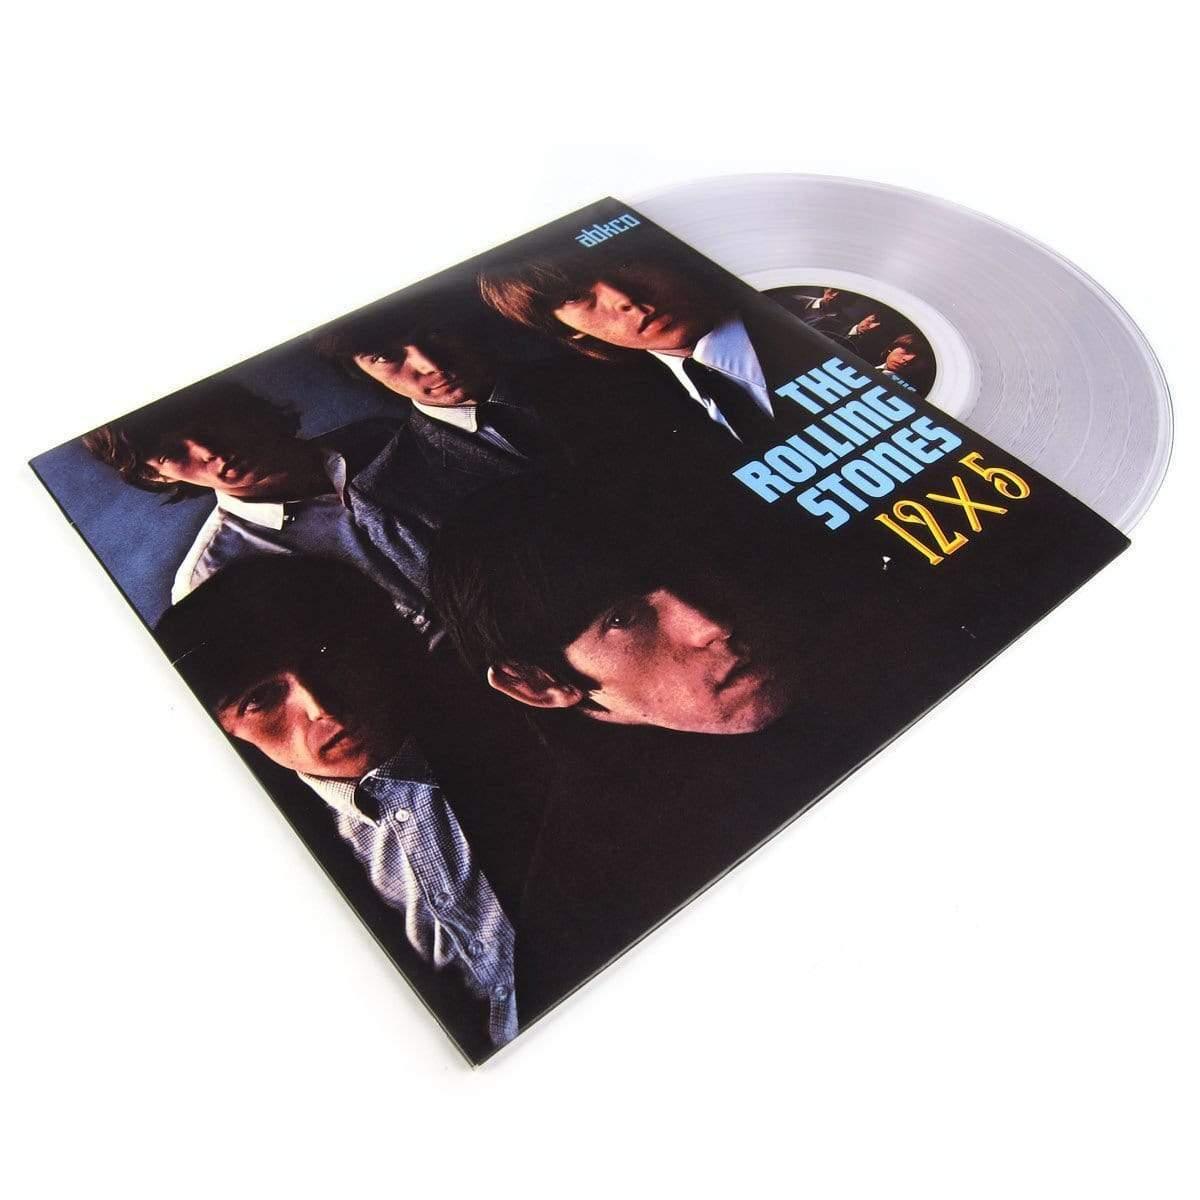 The Rolling Stones - 12 X 5 (Limited Edition, Remastered, 180 Gram, Clear Color Vinyl) (LP) - Joco Records